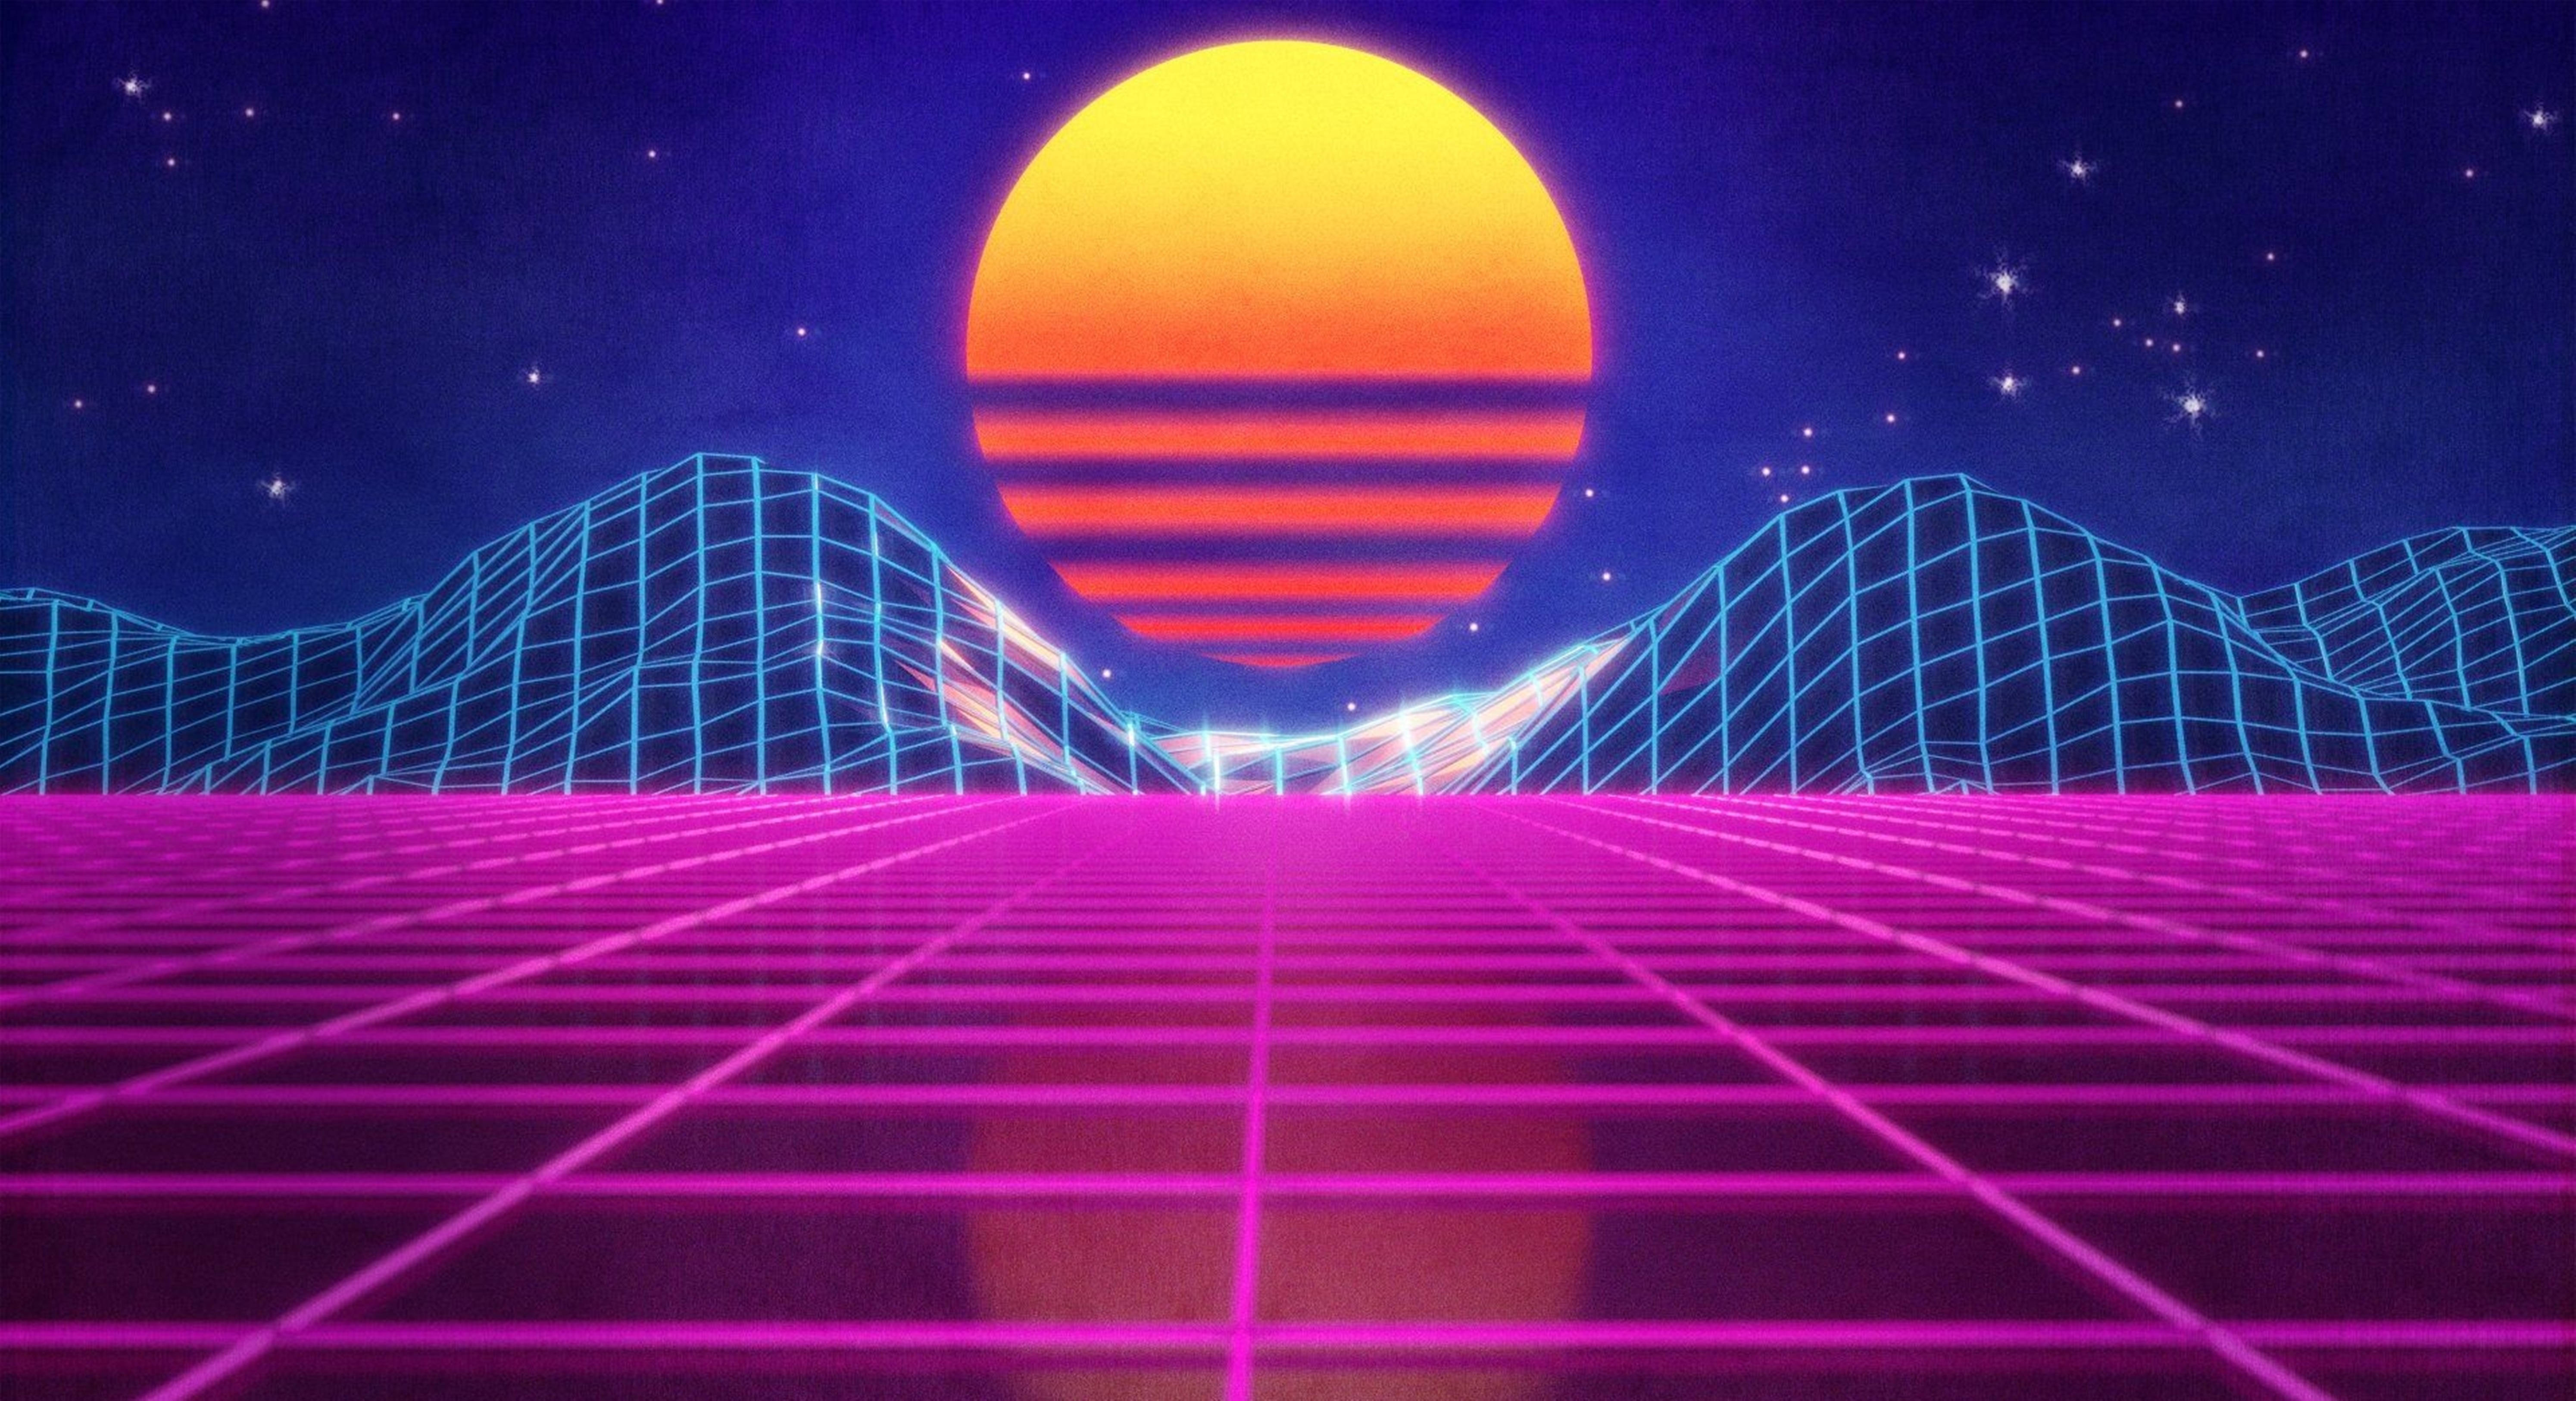 Retrowave Neon Grid Field And Mountain 4k Background